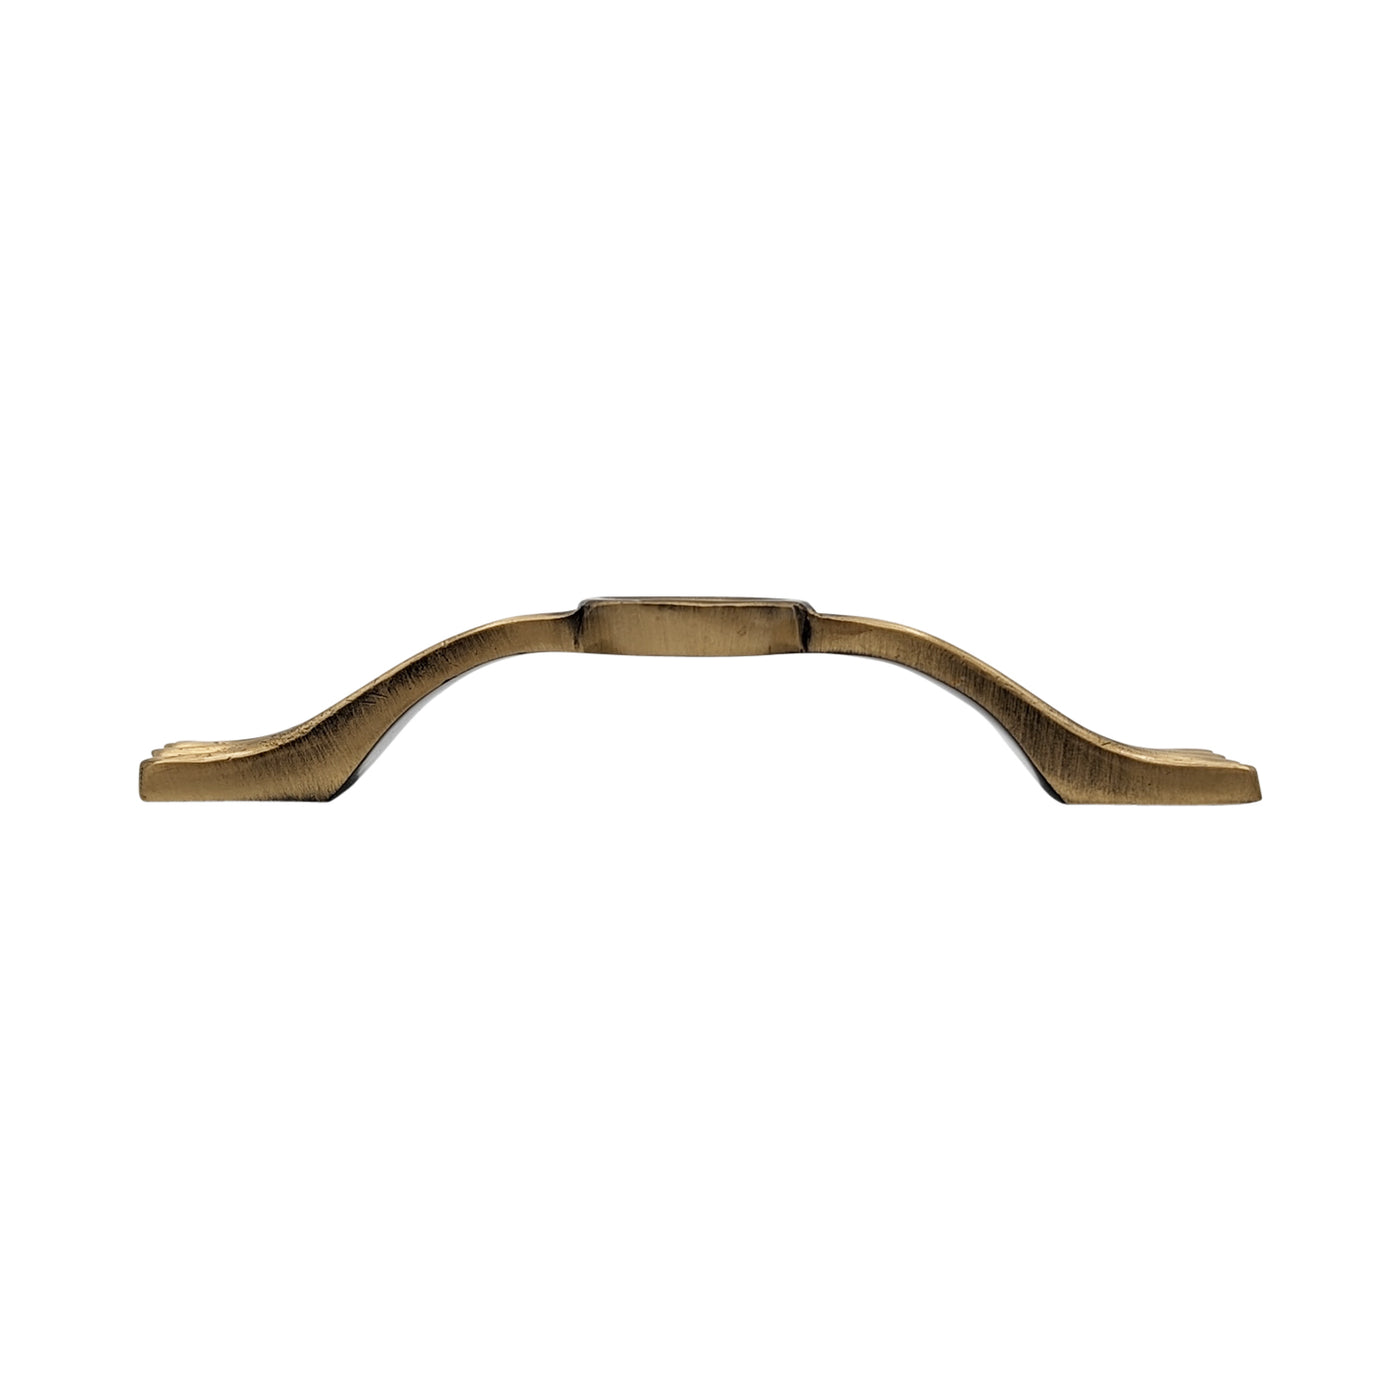 4 3/8 Inch Overall (3 1/4 Inch c-c) Solid Brass Hammered Drawer Pull